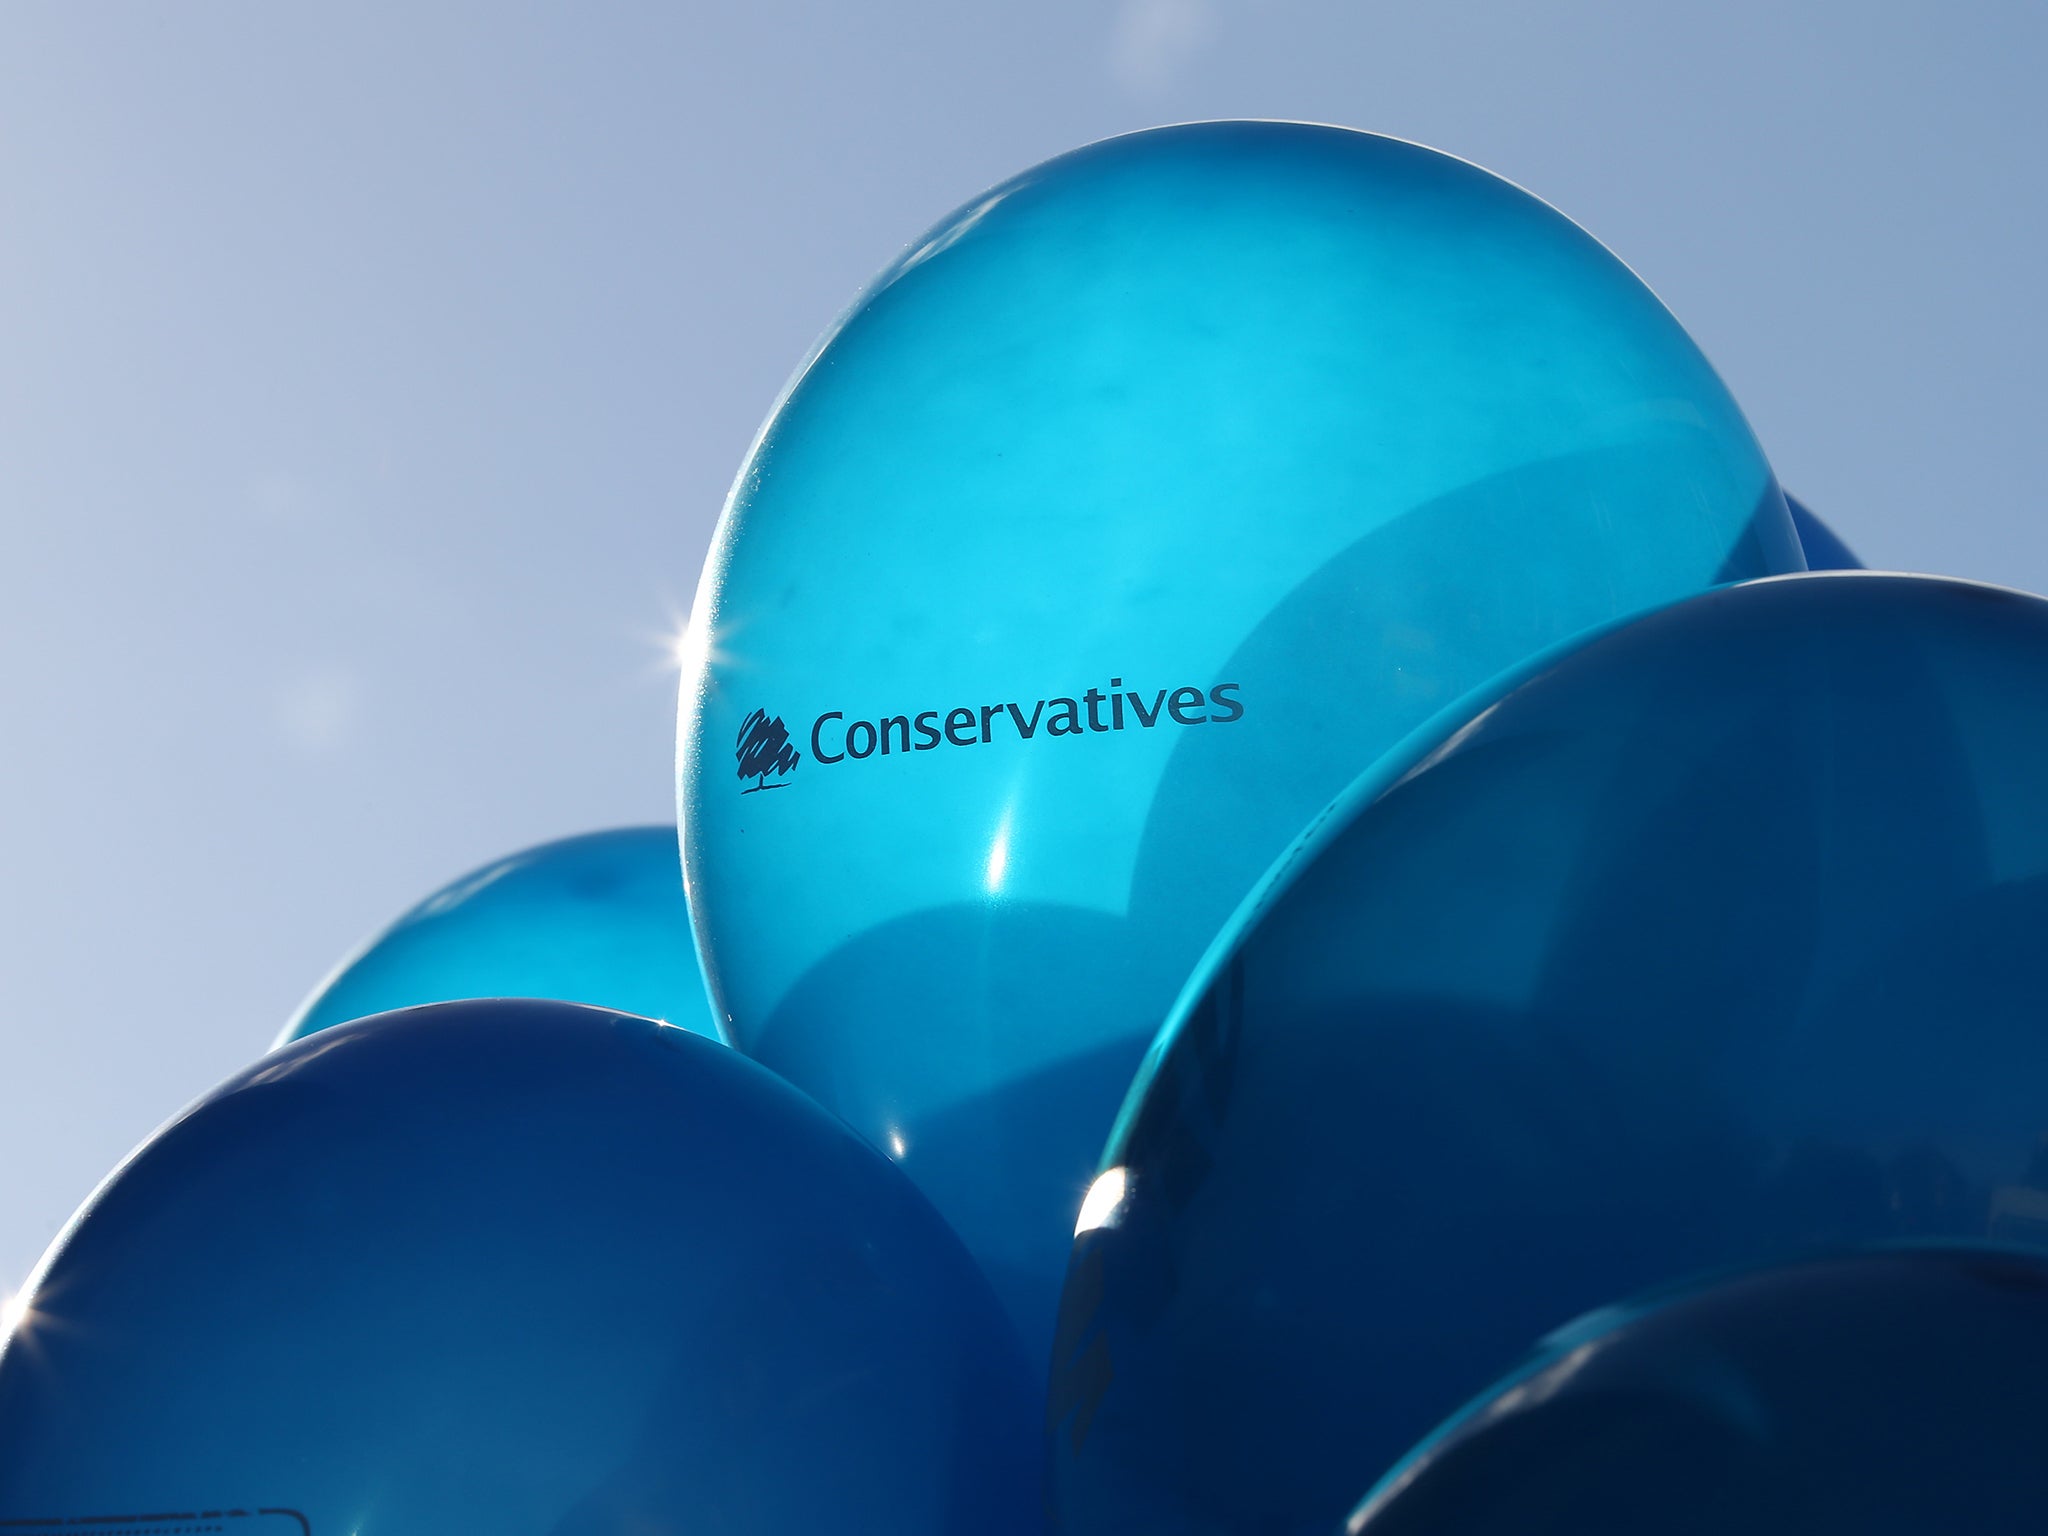 The Conservatives have raised more than £15m more than Labour since the last election